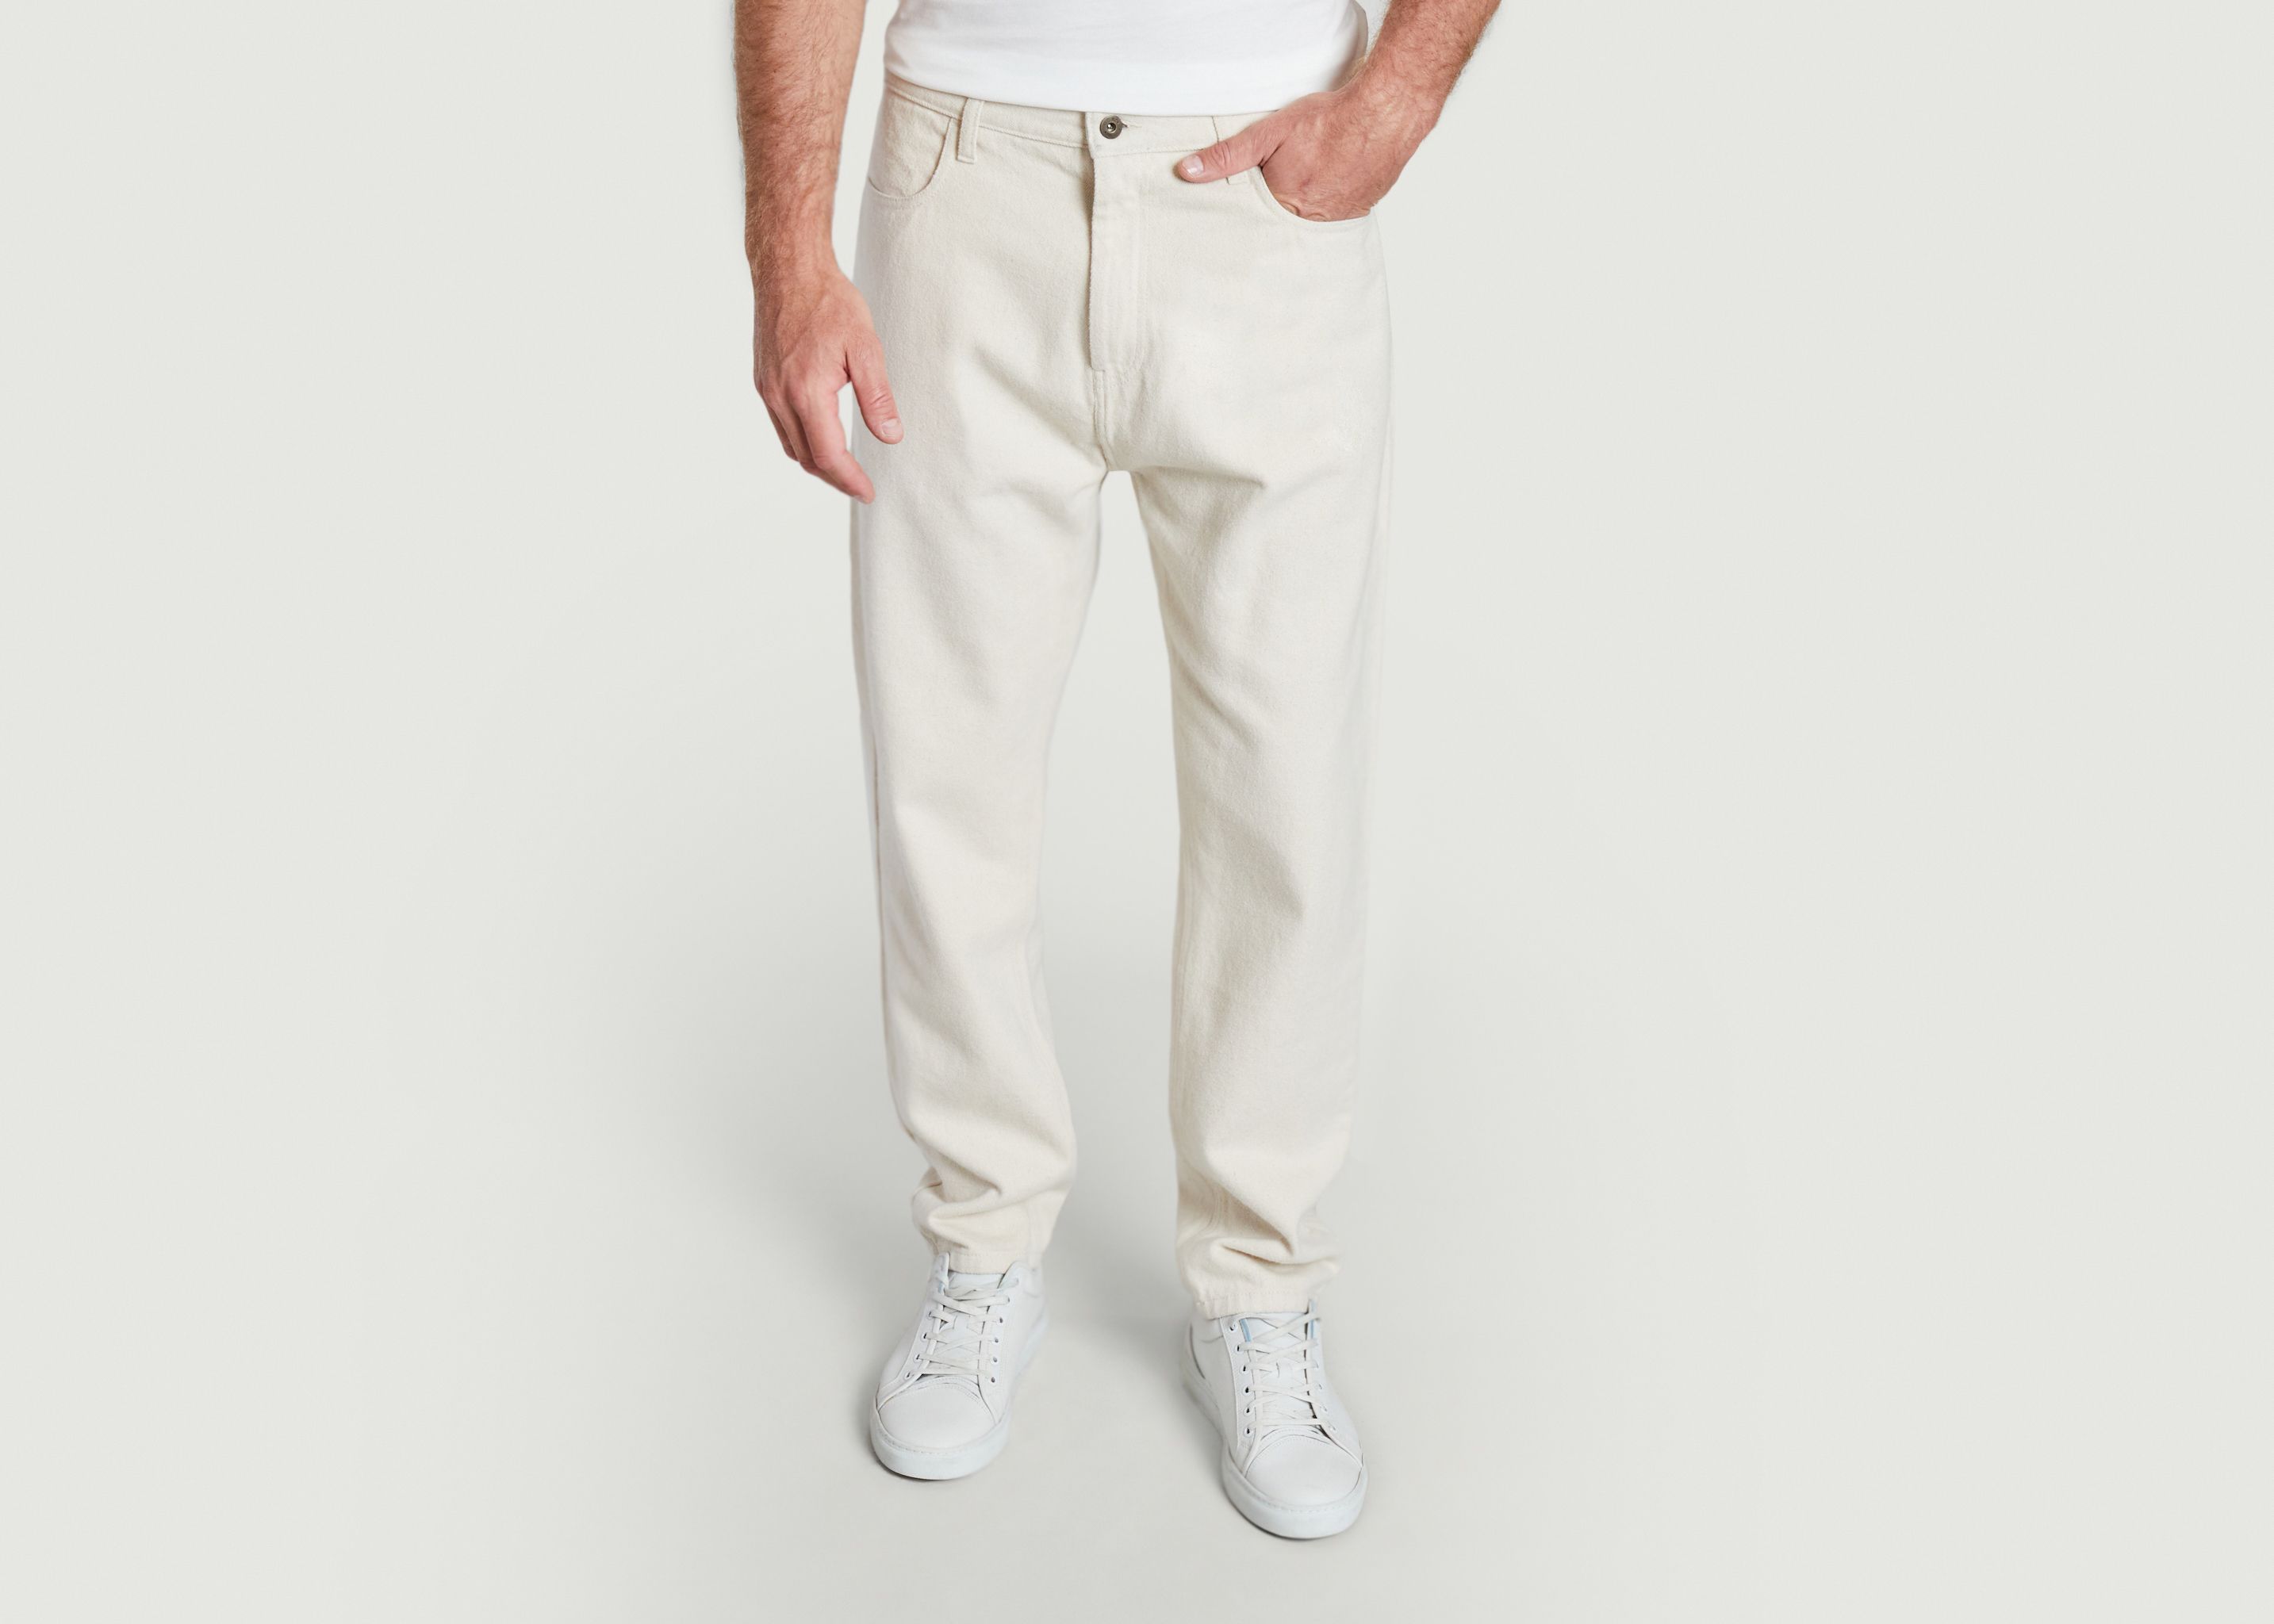 Jacquot trousers - Olow